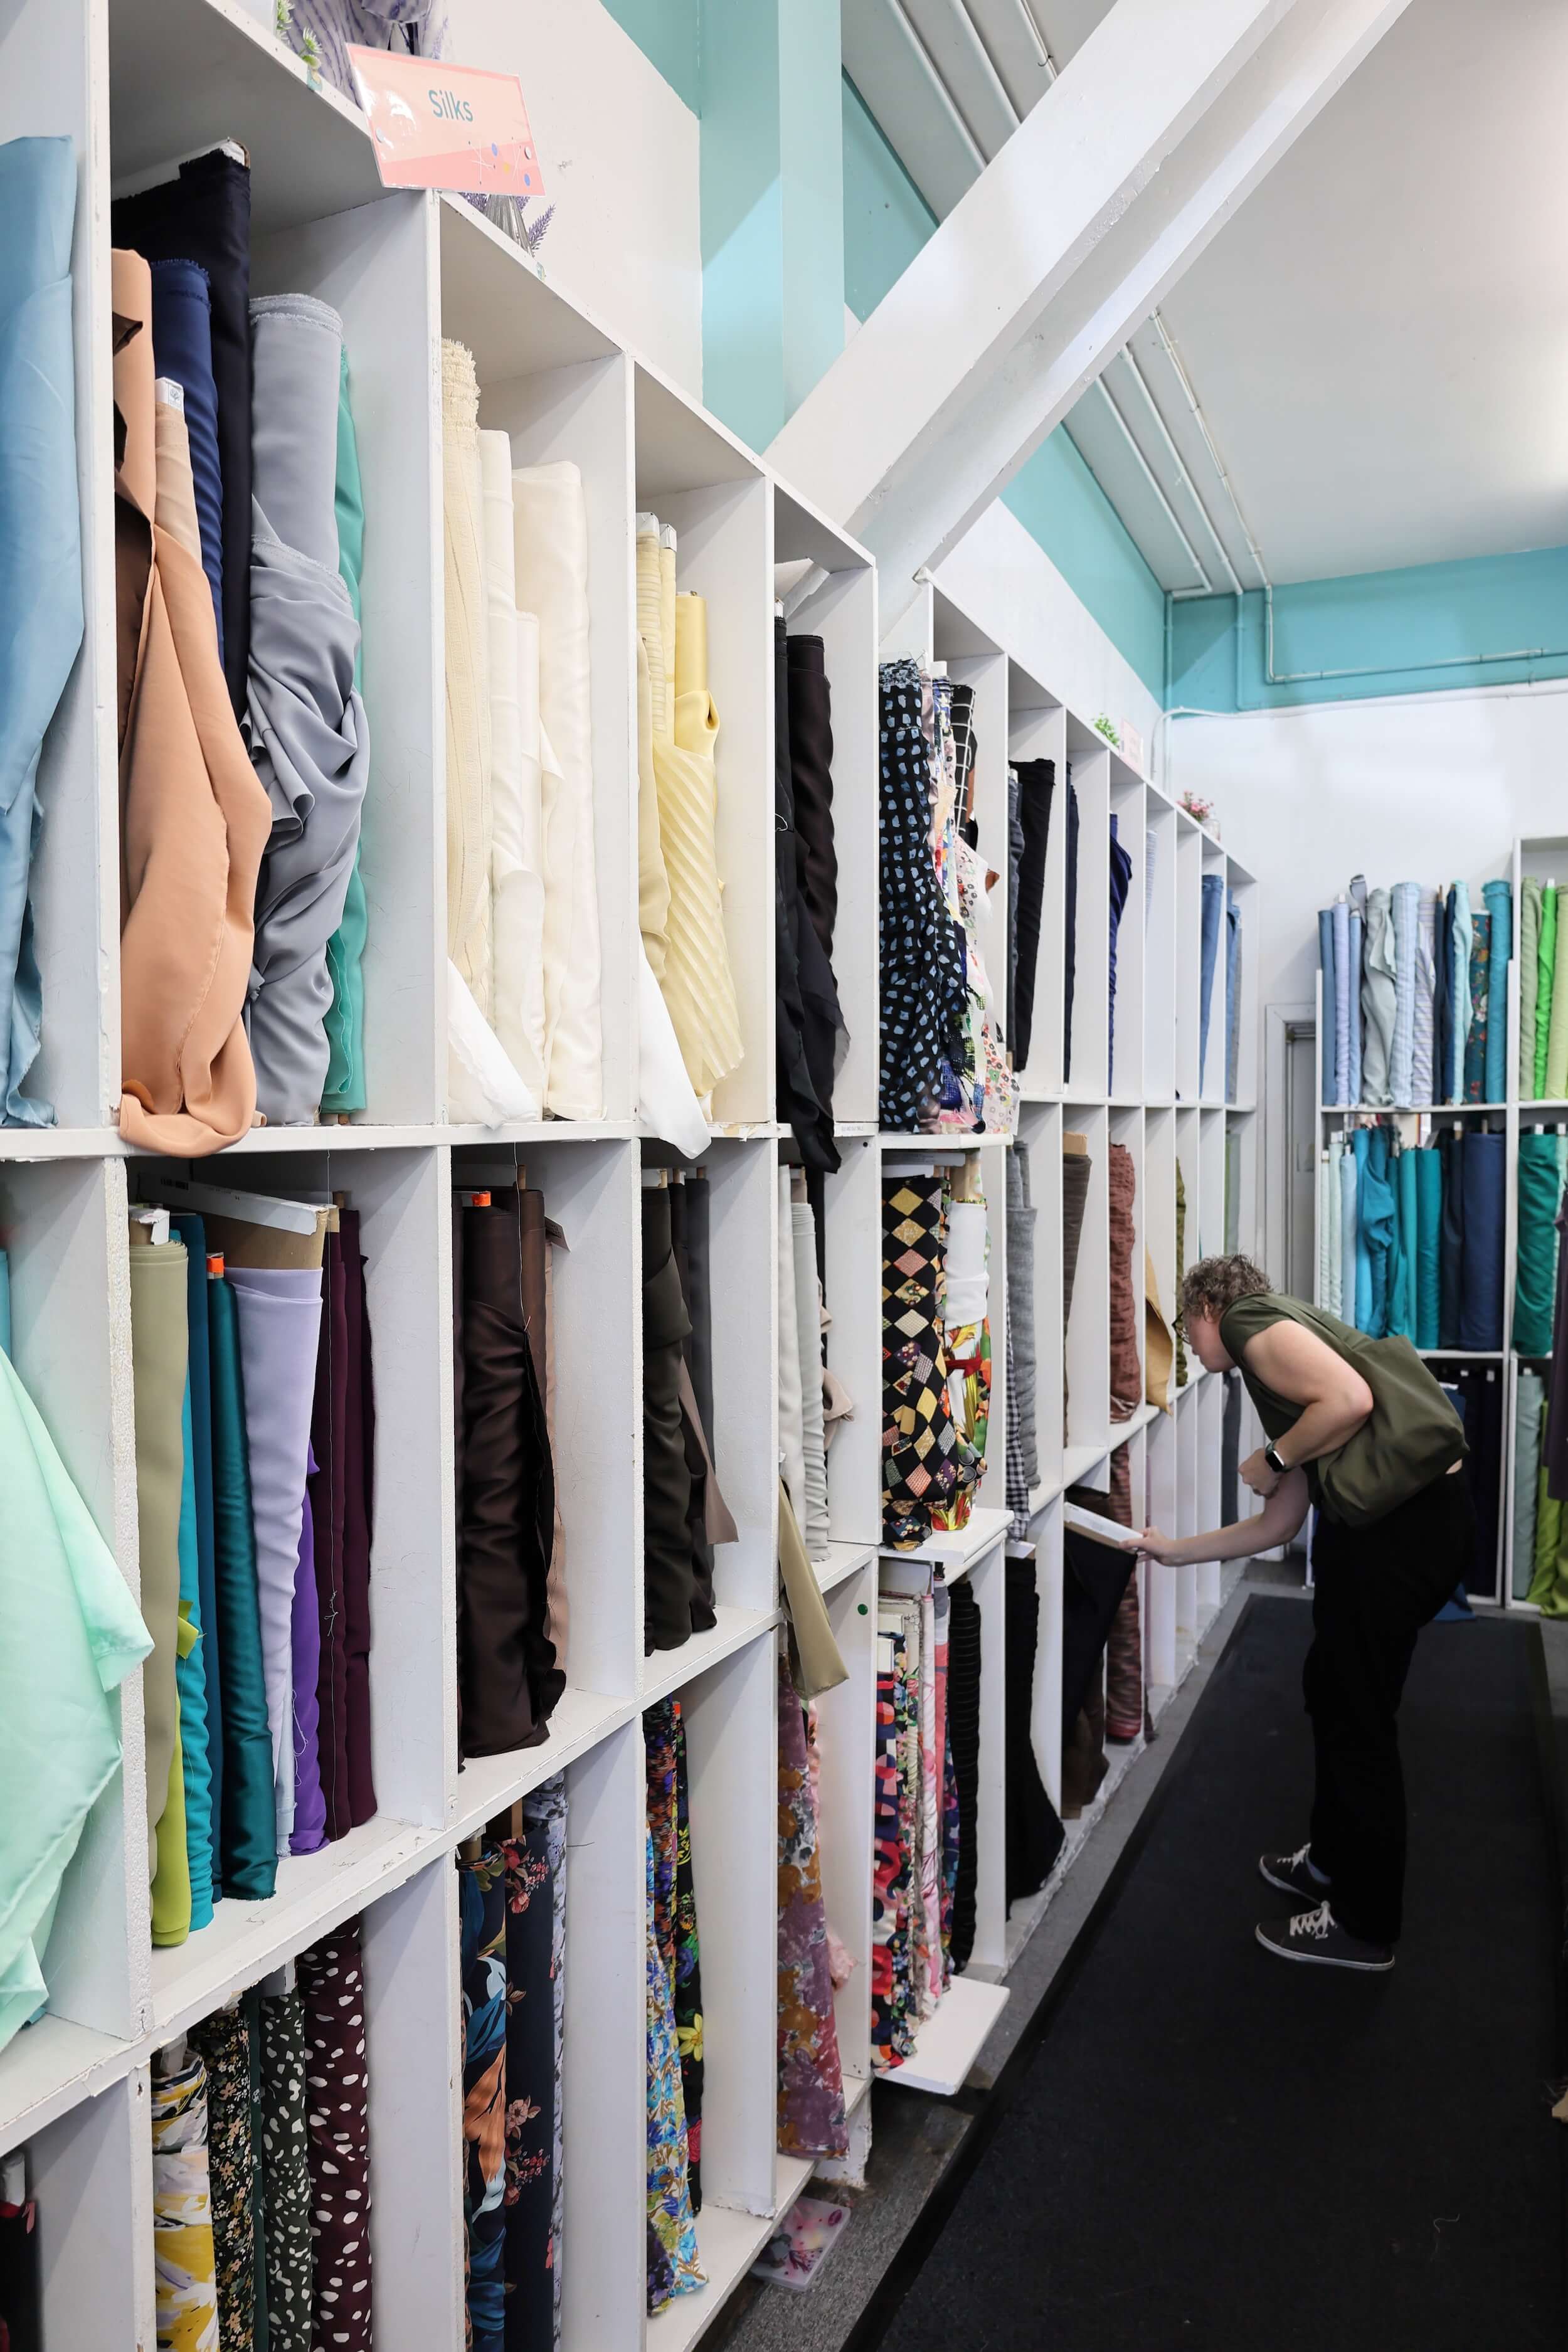 A wall of white shelving filled with bolts of fabric in all different colors and in the mid ground a woman stands bent down with a small bag over her shoulder pulling out a bolt of fabric to look more closely at it.